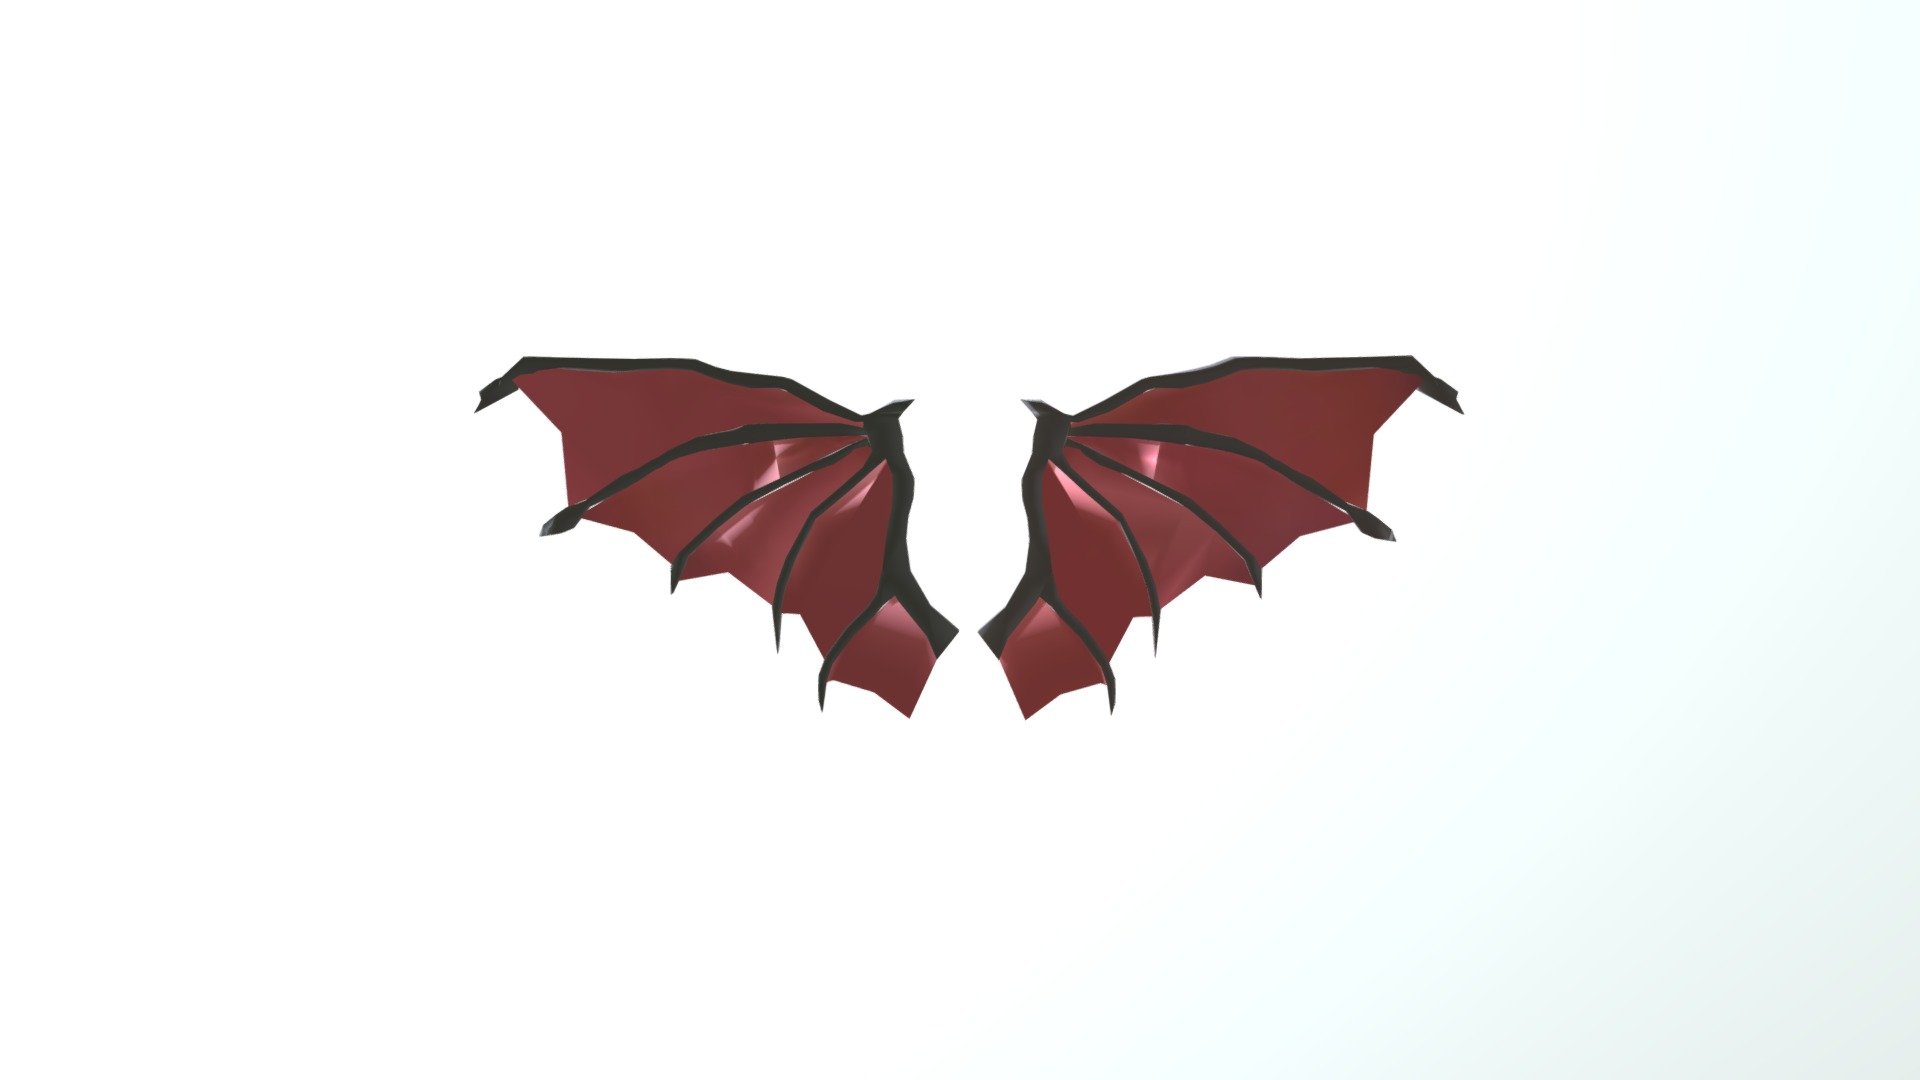 d Devil wings Red and black made by Rocket champion - Devil wings - 3D model by hilljaquarri 3d model